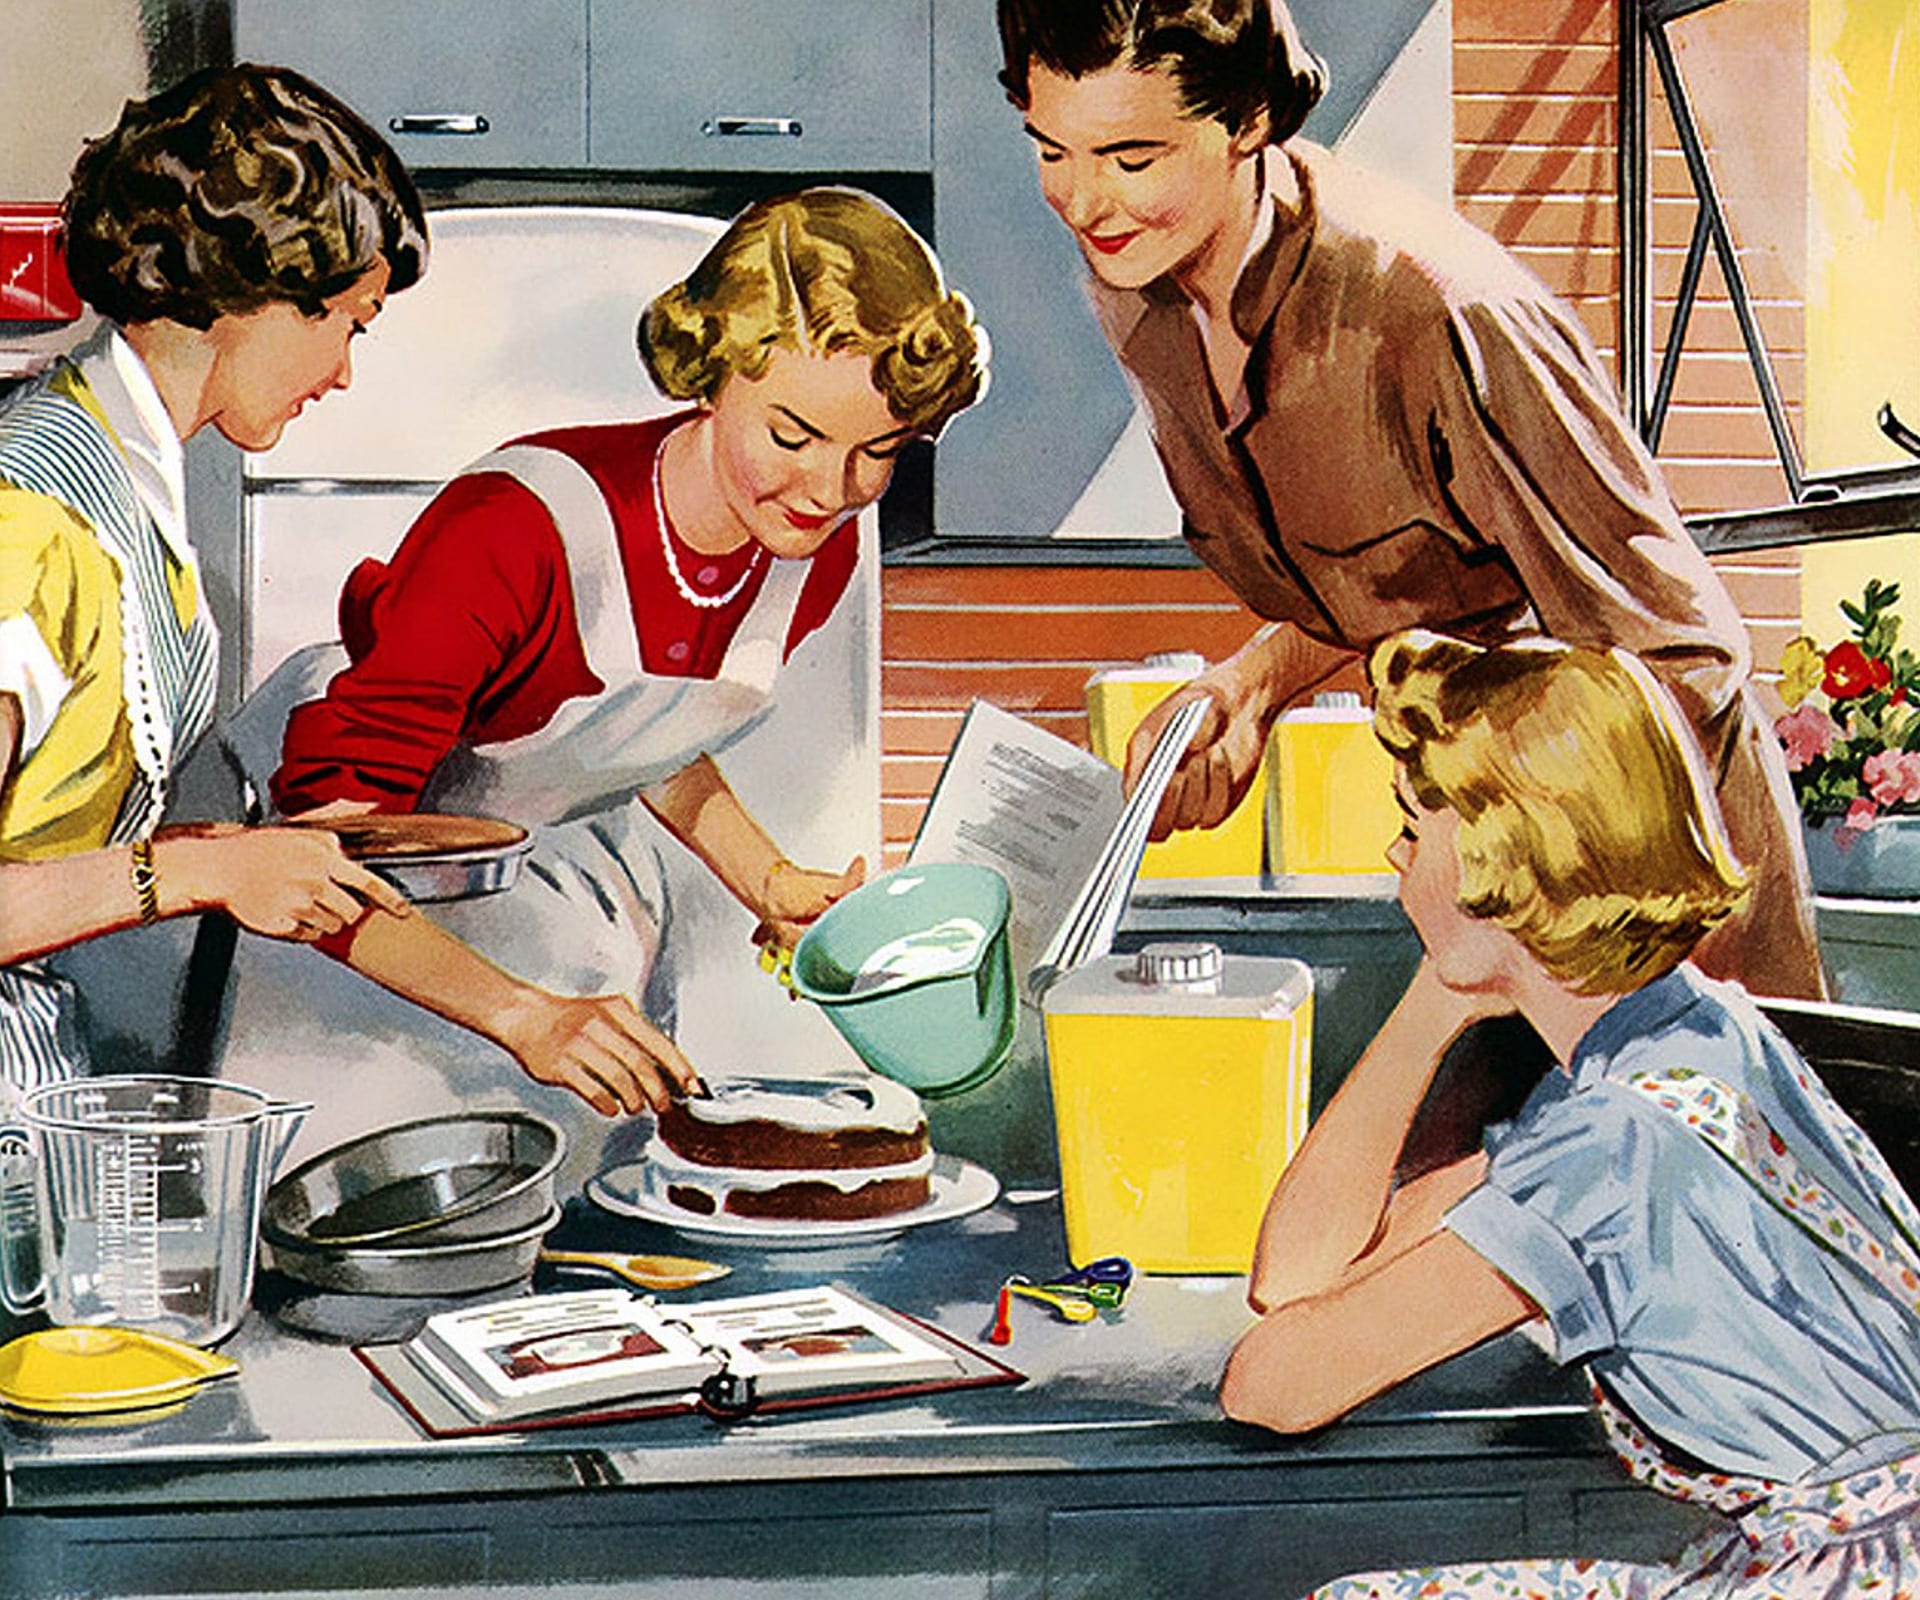 Advantages and disadvantages of being a housewife